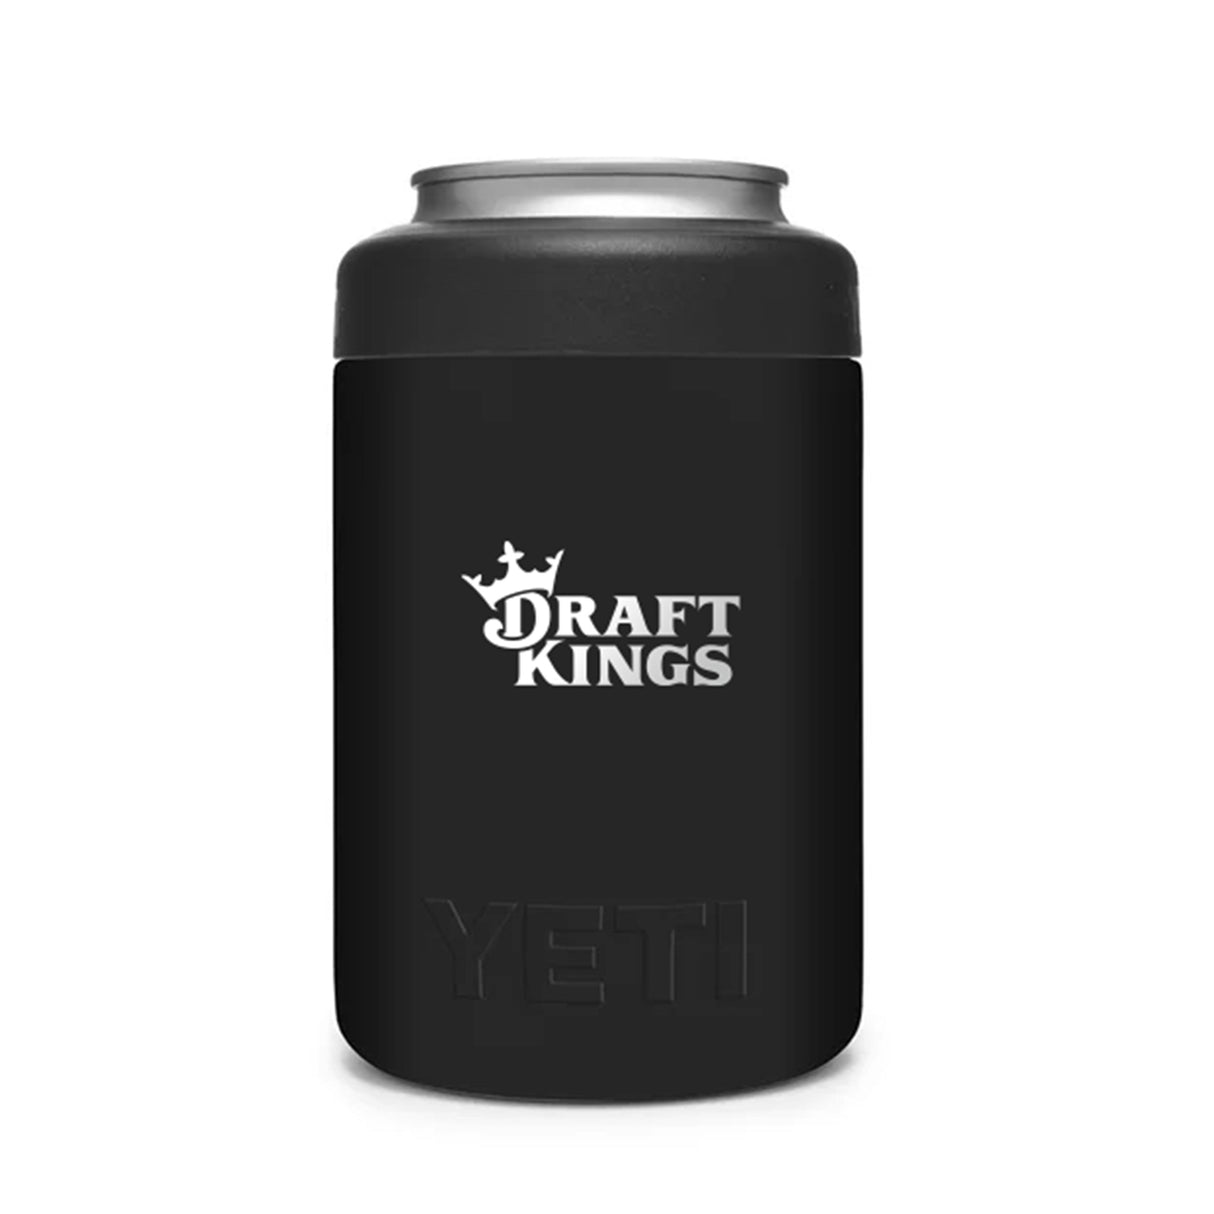 Yeti 12 Oz Colster Can Cooler - White